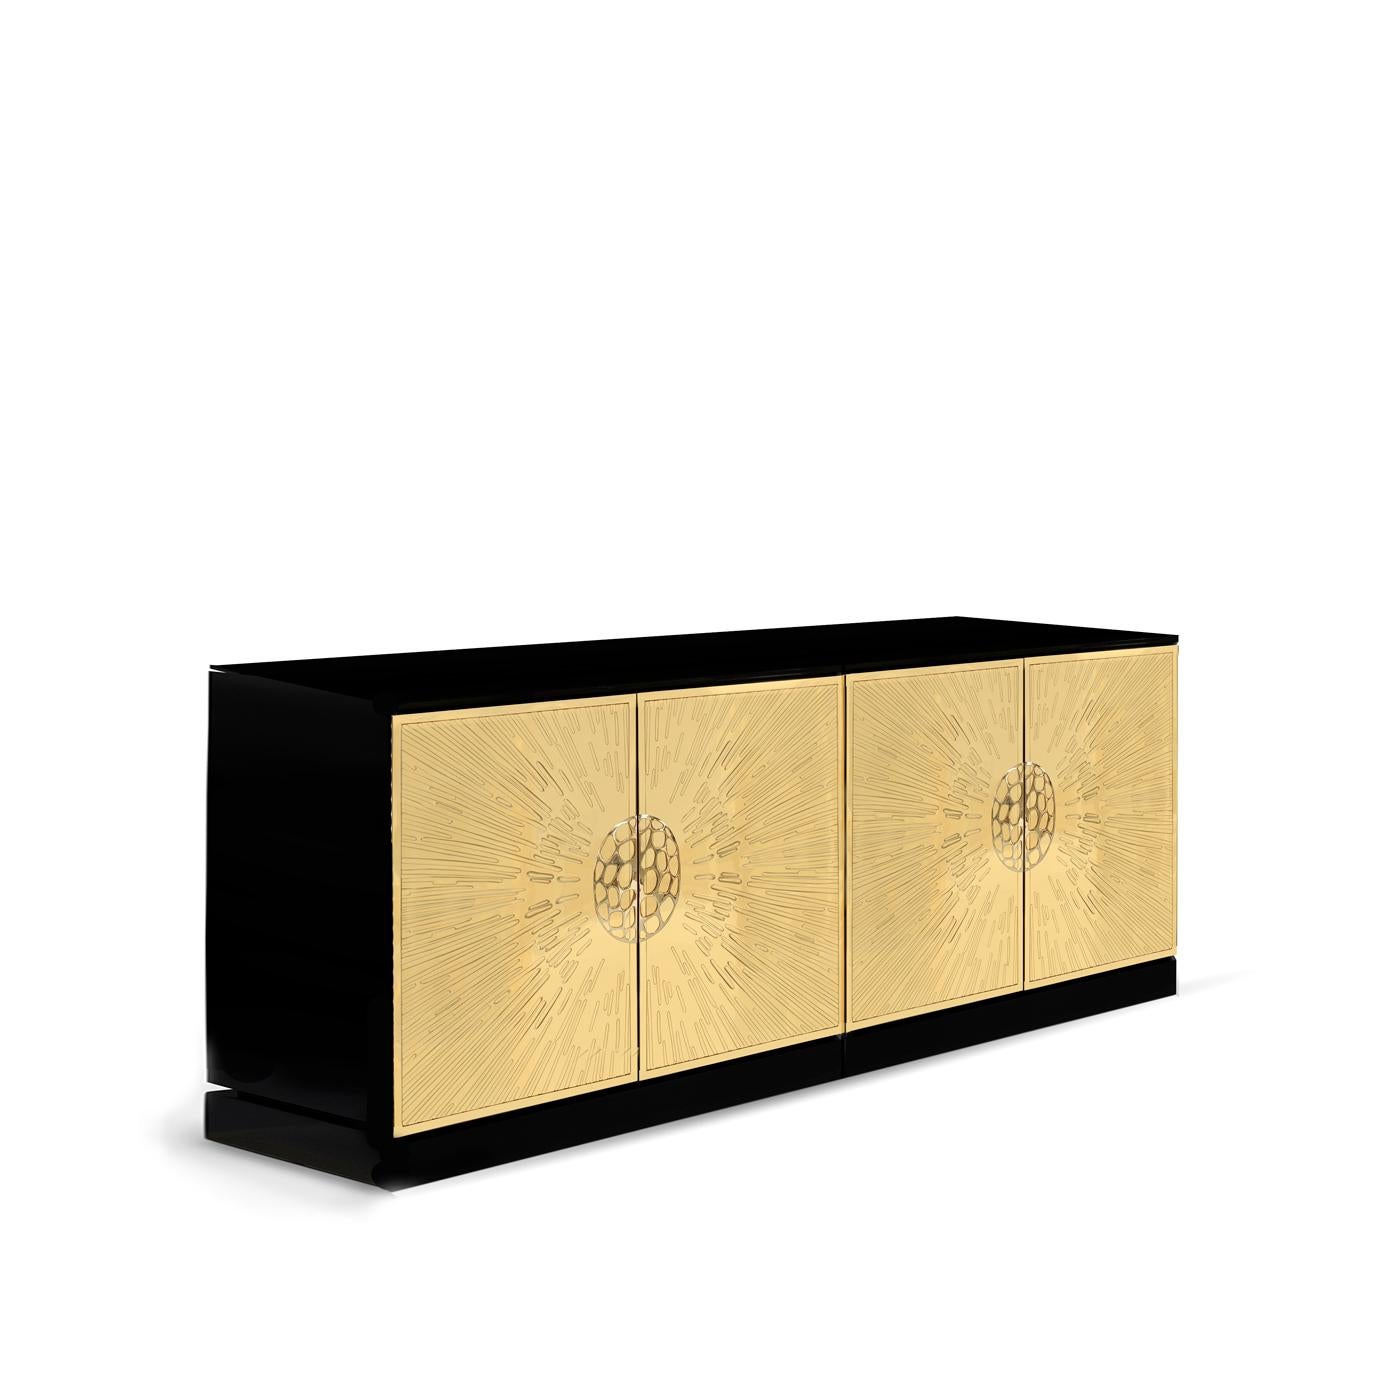 Dripping like honey with KOKET glamor, Heive is the Queen Bee of timeless black and gold cabinets. The alluring golden doors feature an exploding sunburst
design enchanting you at first glance. For her majestic crowning touch, an enticing honeycomb